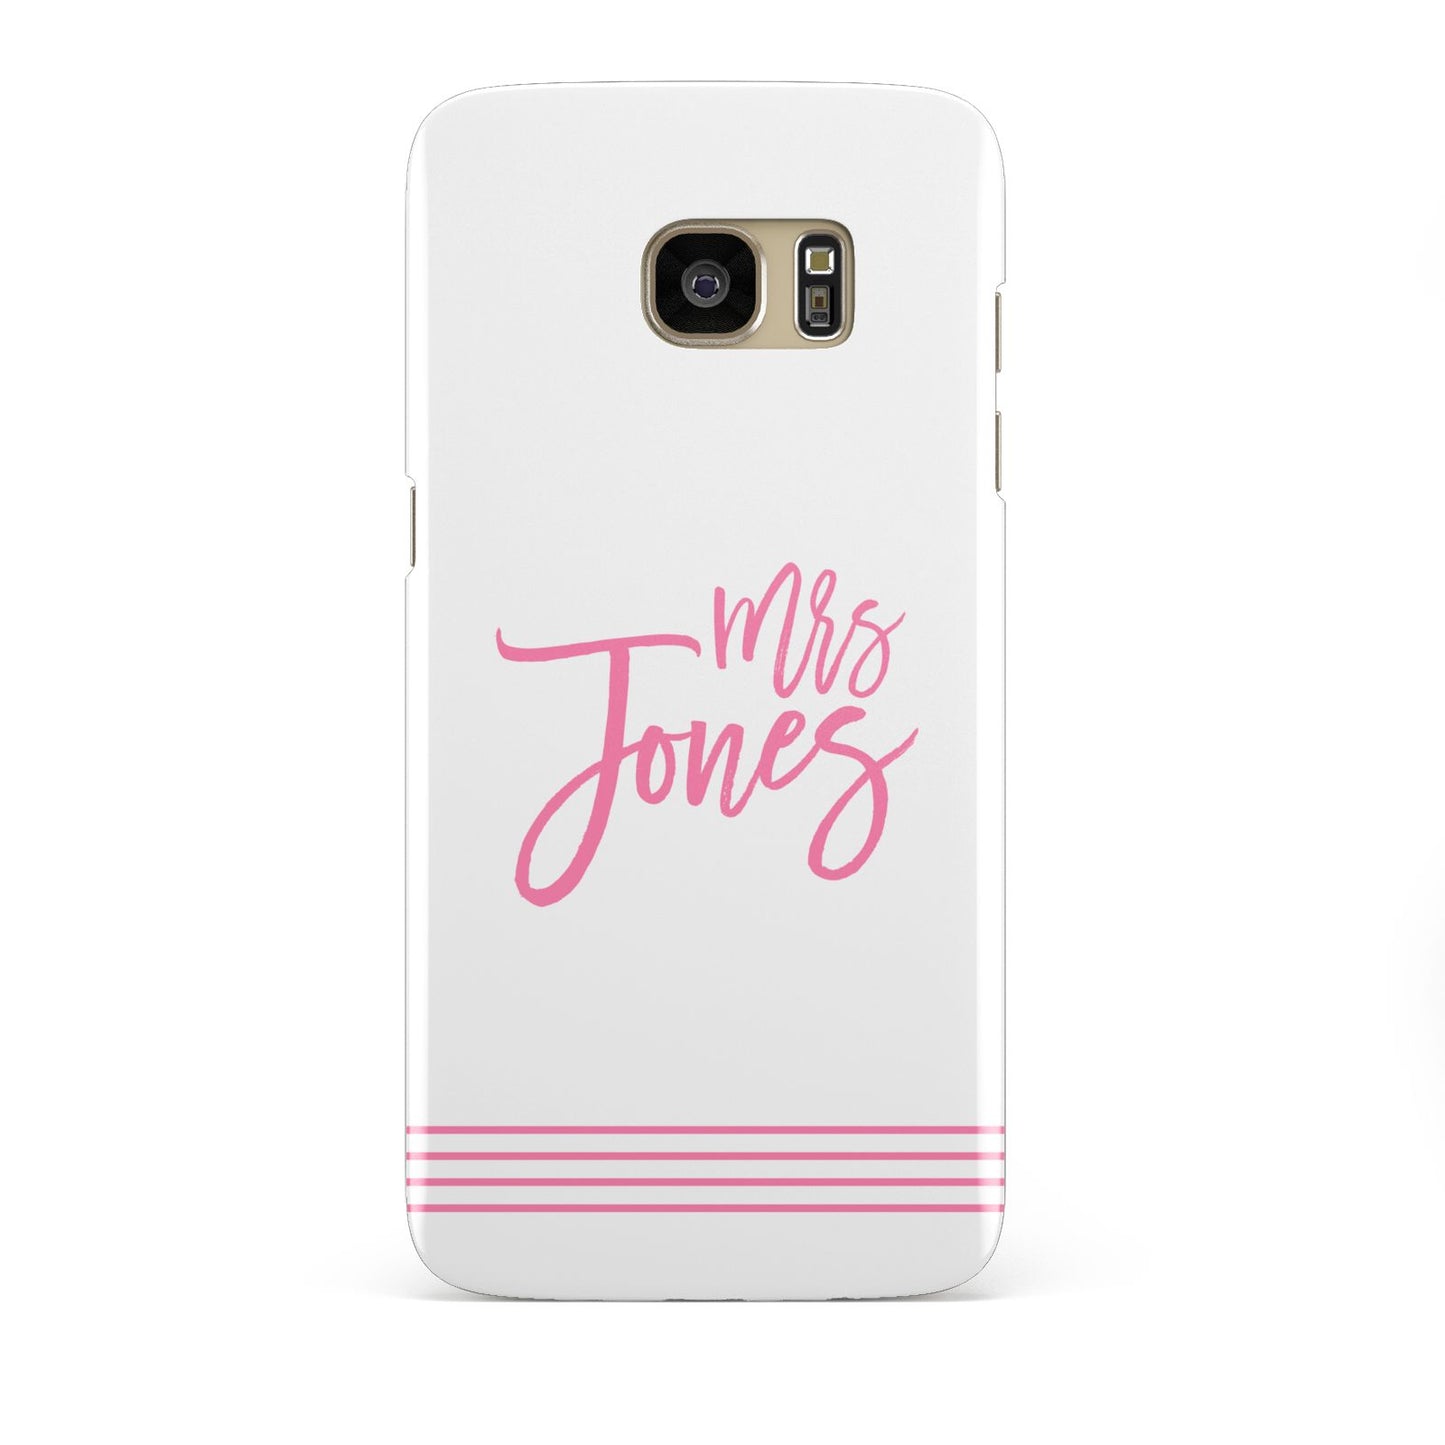 Personalised Hers Samsung Galaxy S7 Edge Case